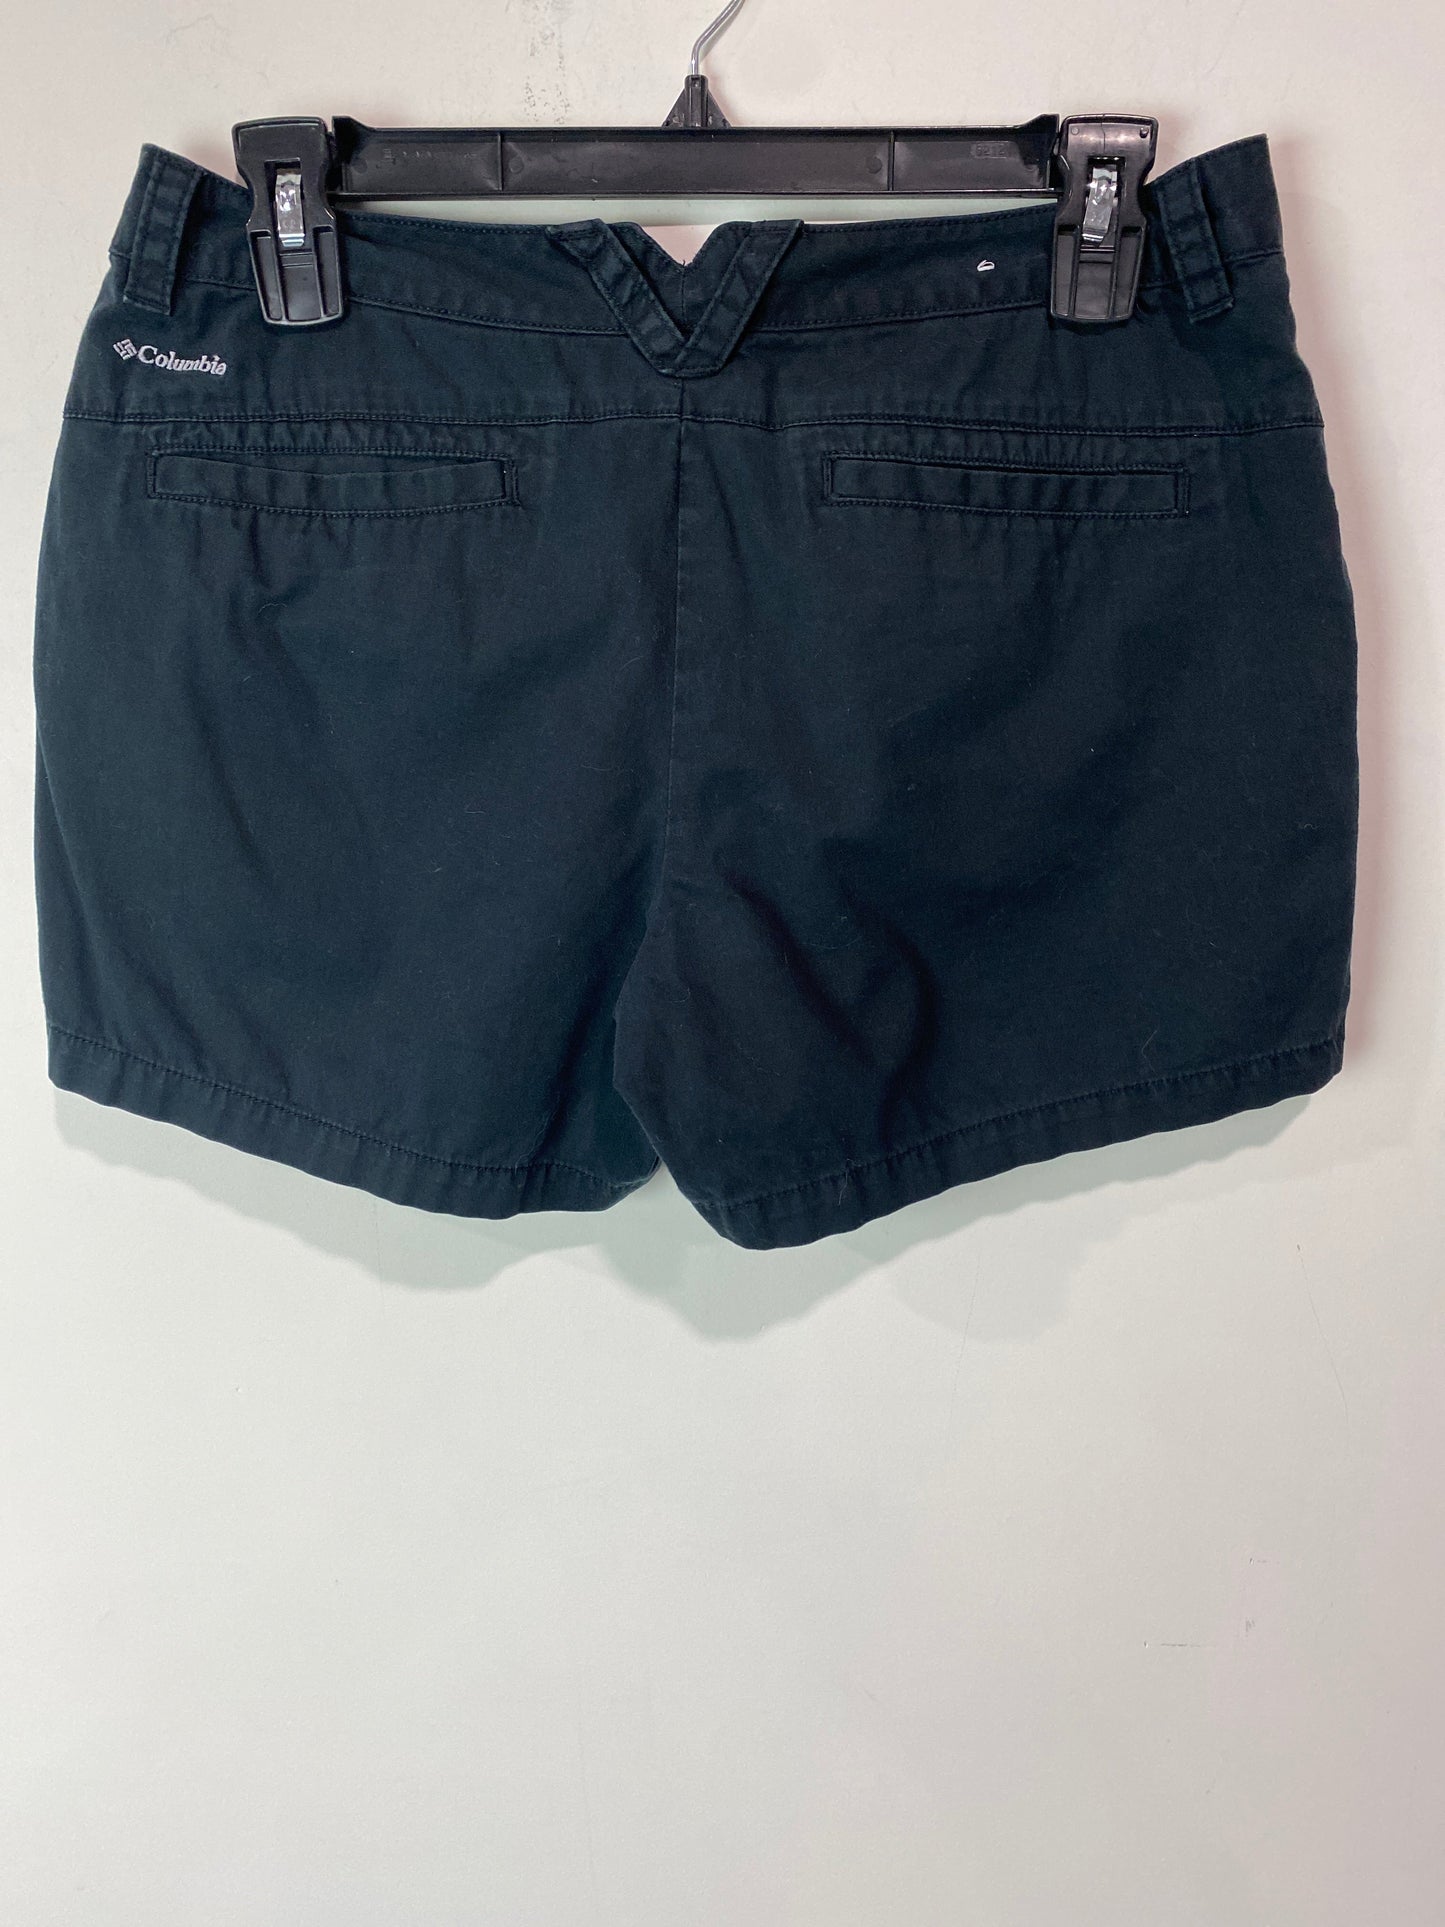 Shorts By Columbia  Size: 6